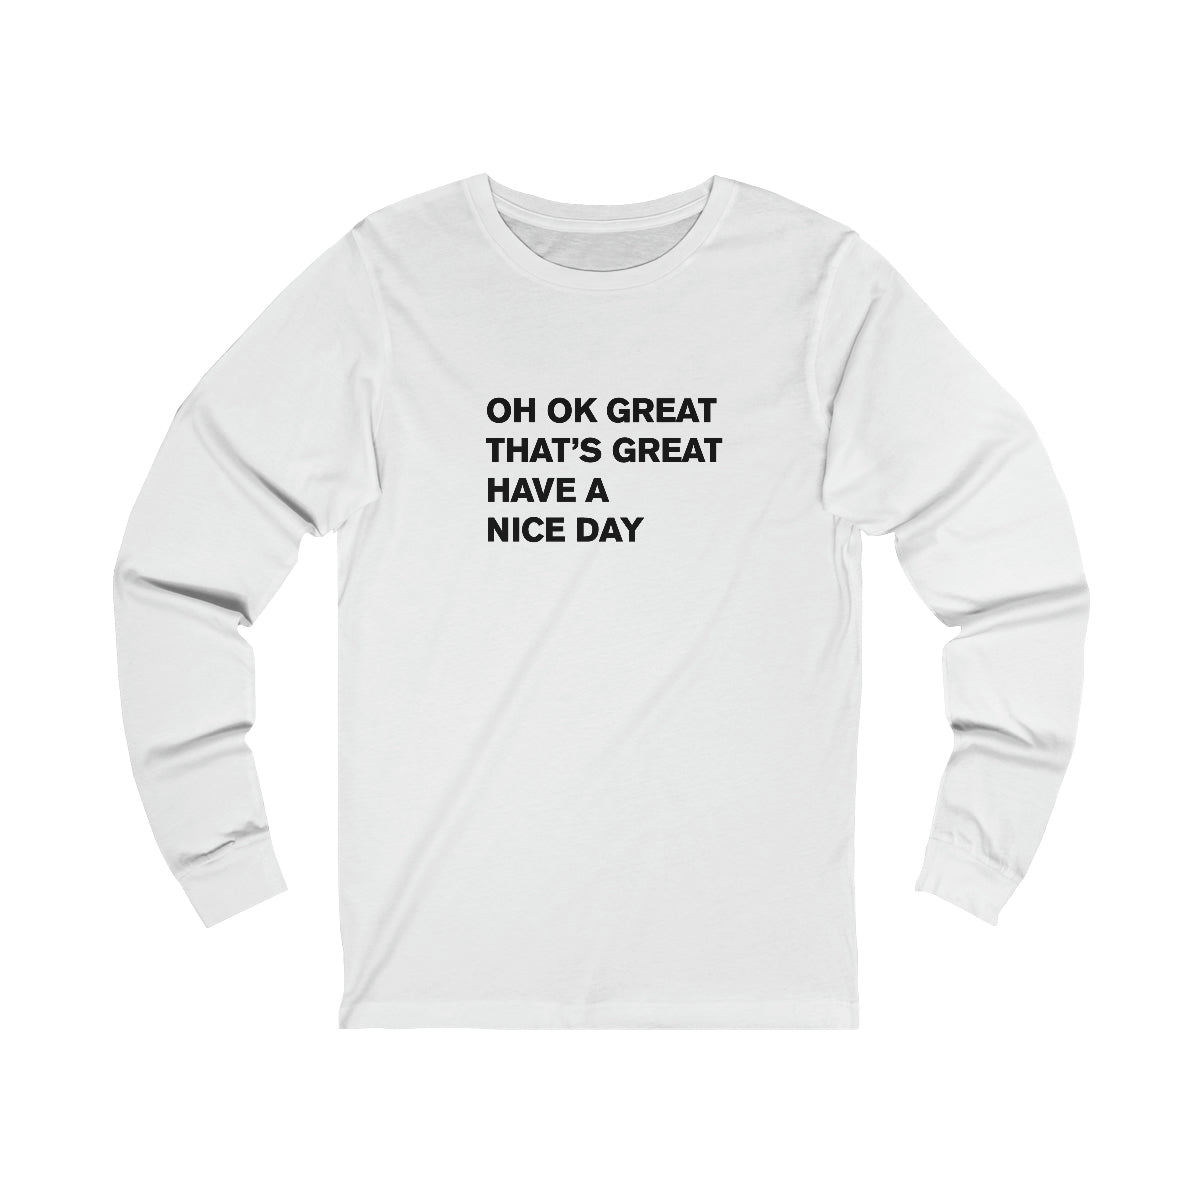 HAVE A NICE DAY - long sleeve